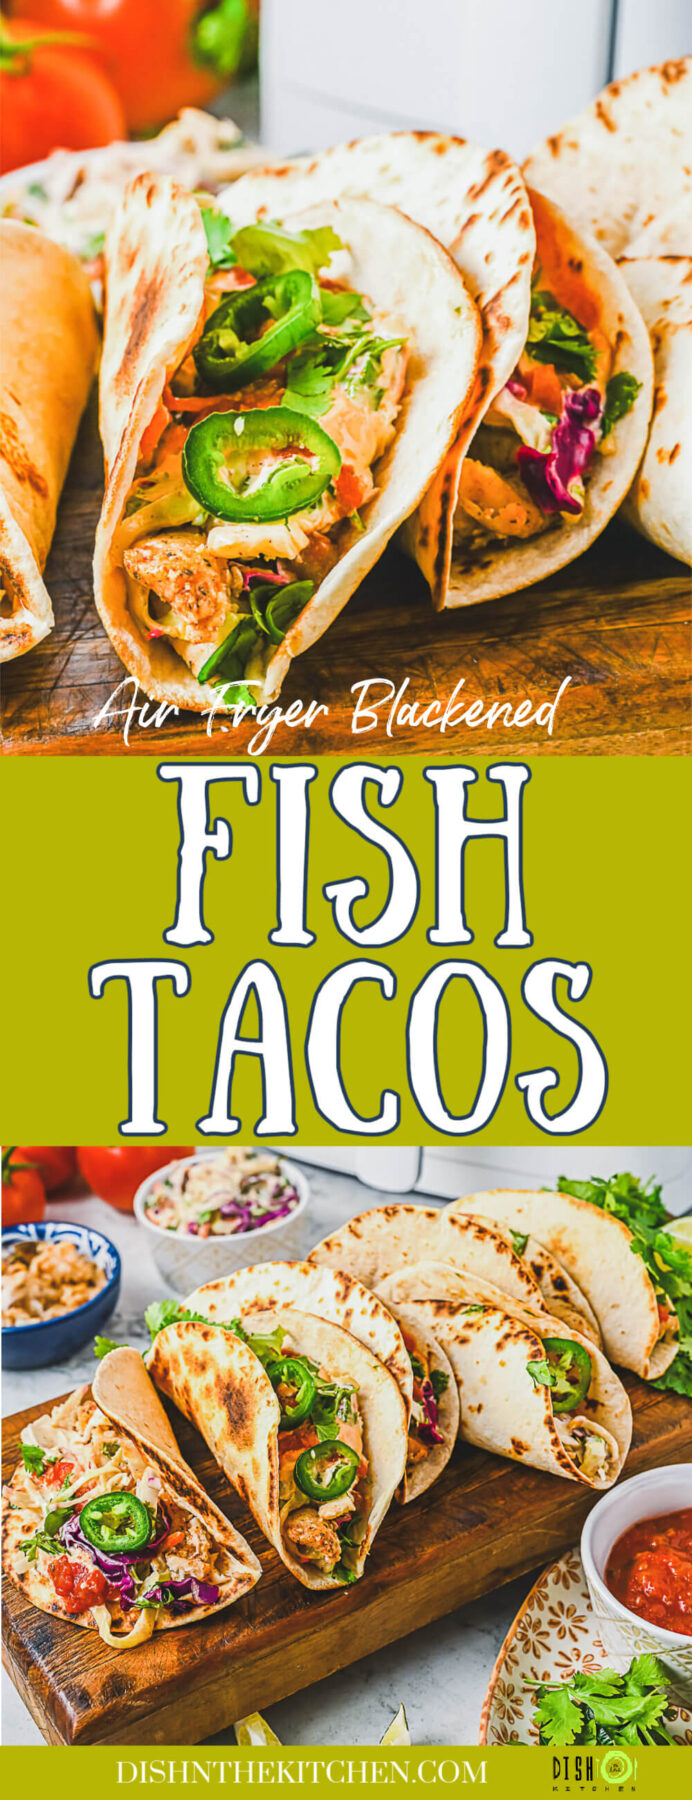 Pinterest image featuring blackened air fryer fish tacos topped with cilantro slaw on a wooden board in front of an air fryer.